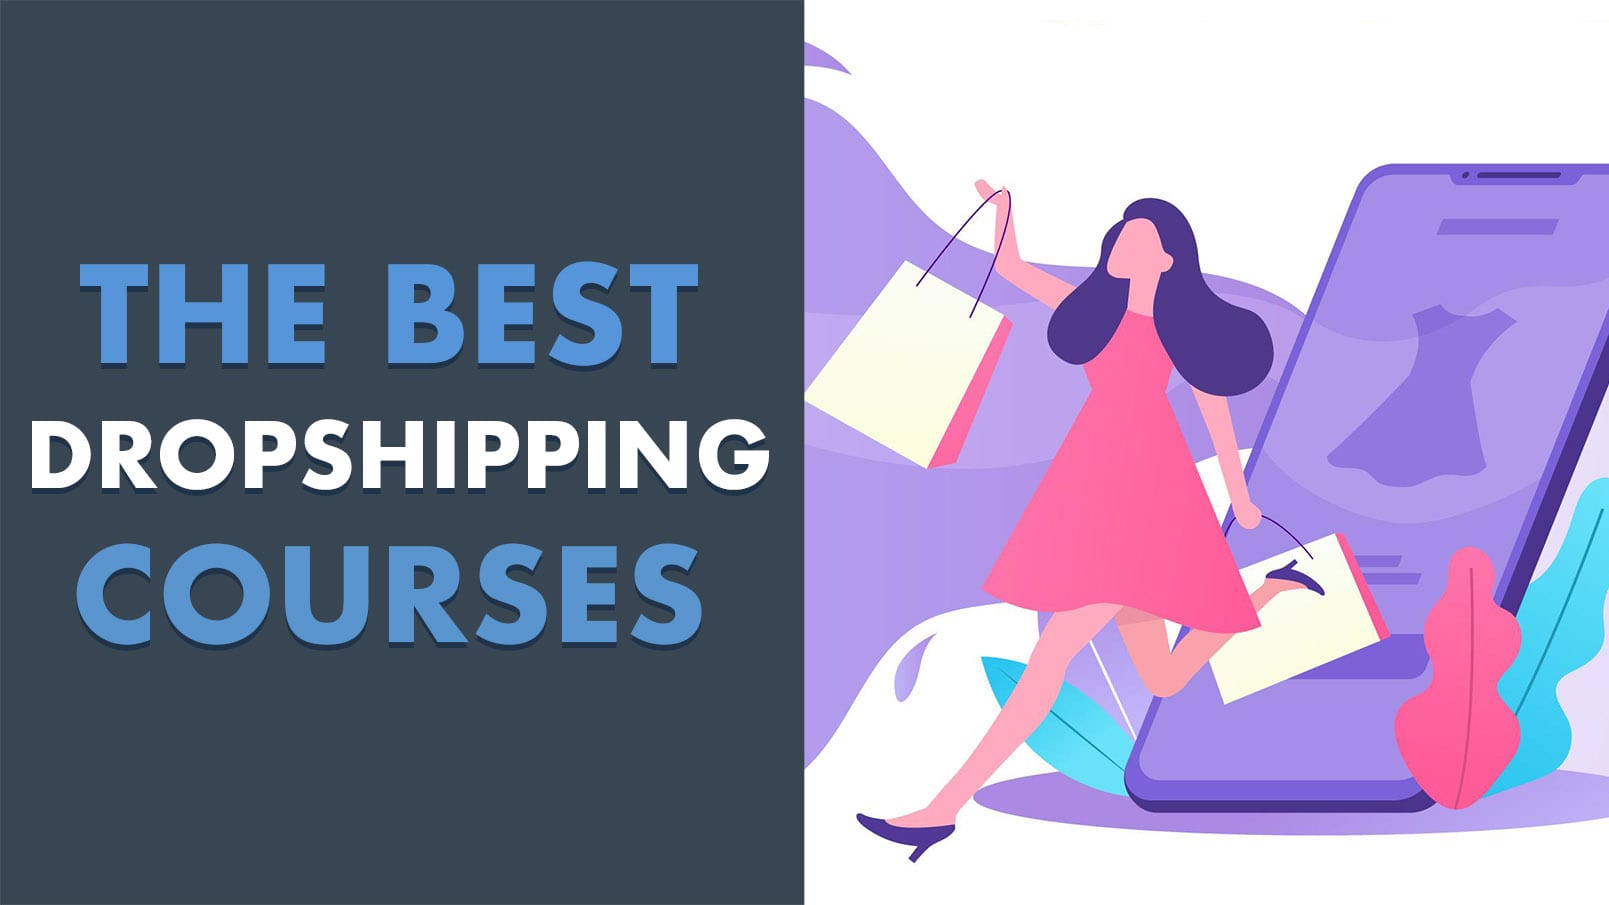 tidevand dagsorden Regnskab 7 Best Dropshipping Courses, Classes and Tutorials Online